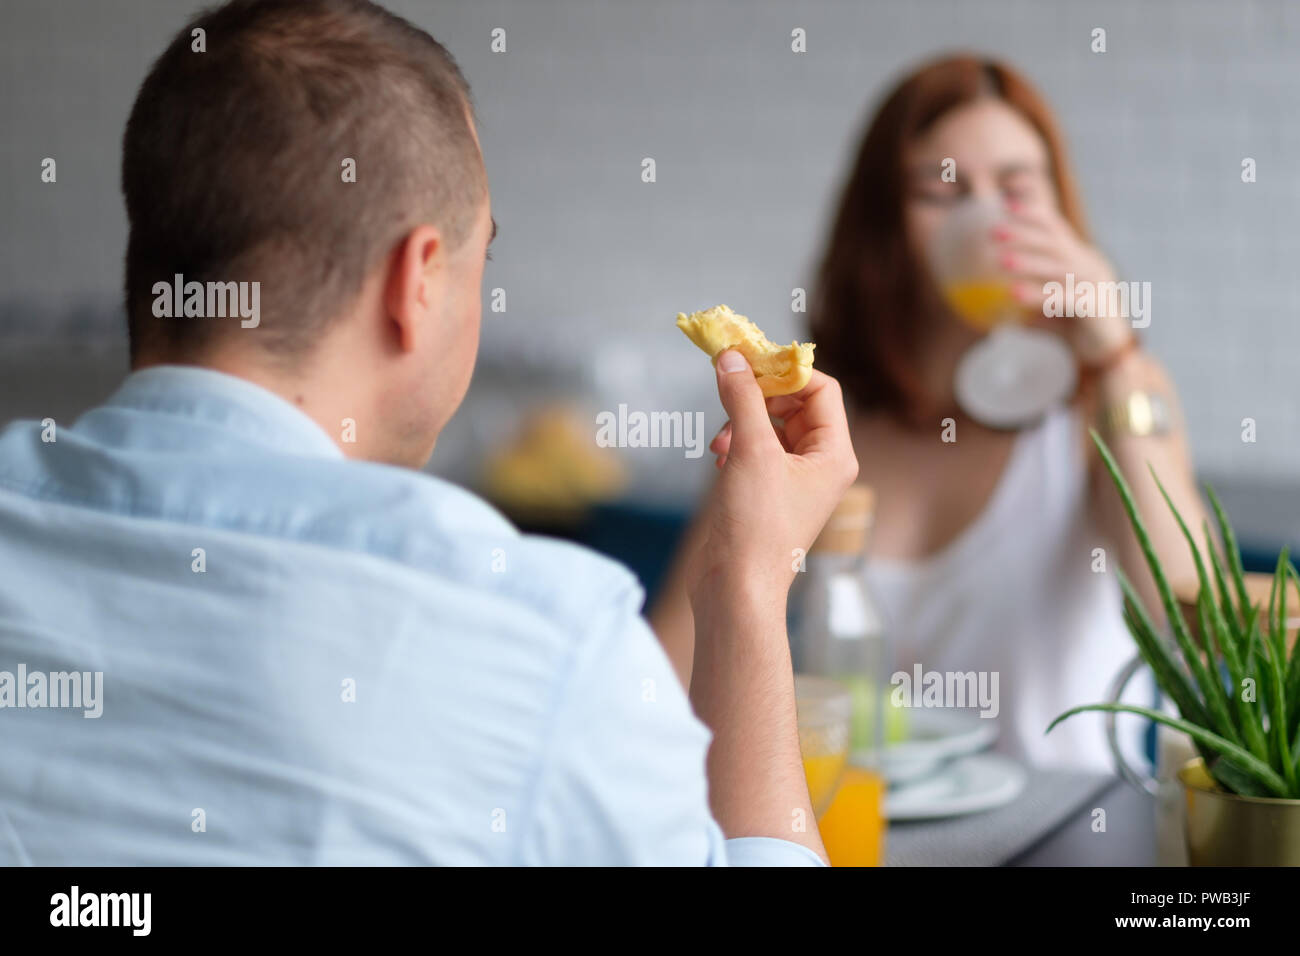 Selective focus photo of two people eating a croissant and drinking orange juice for breakfast Stock Photo